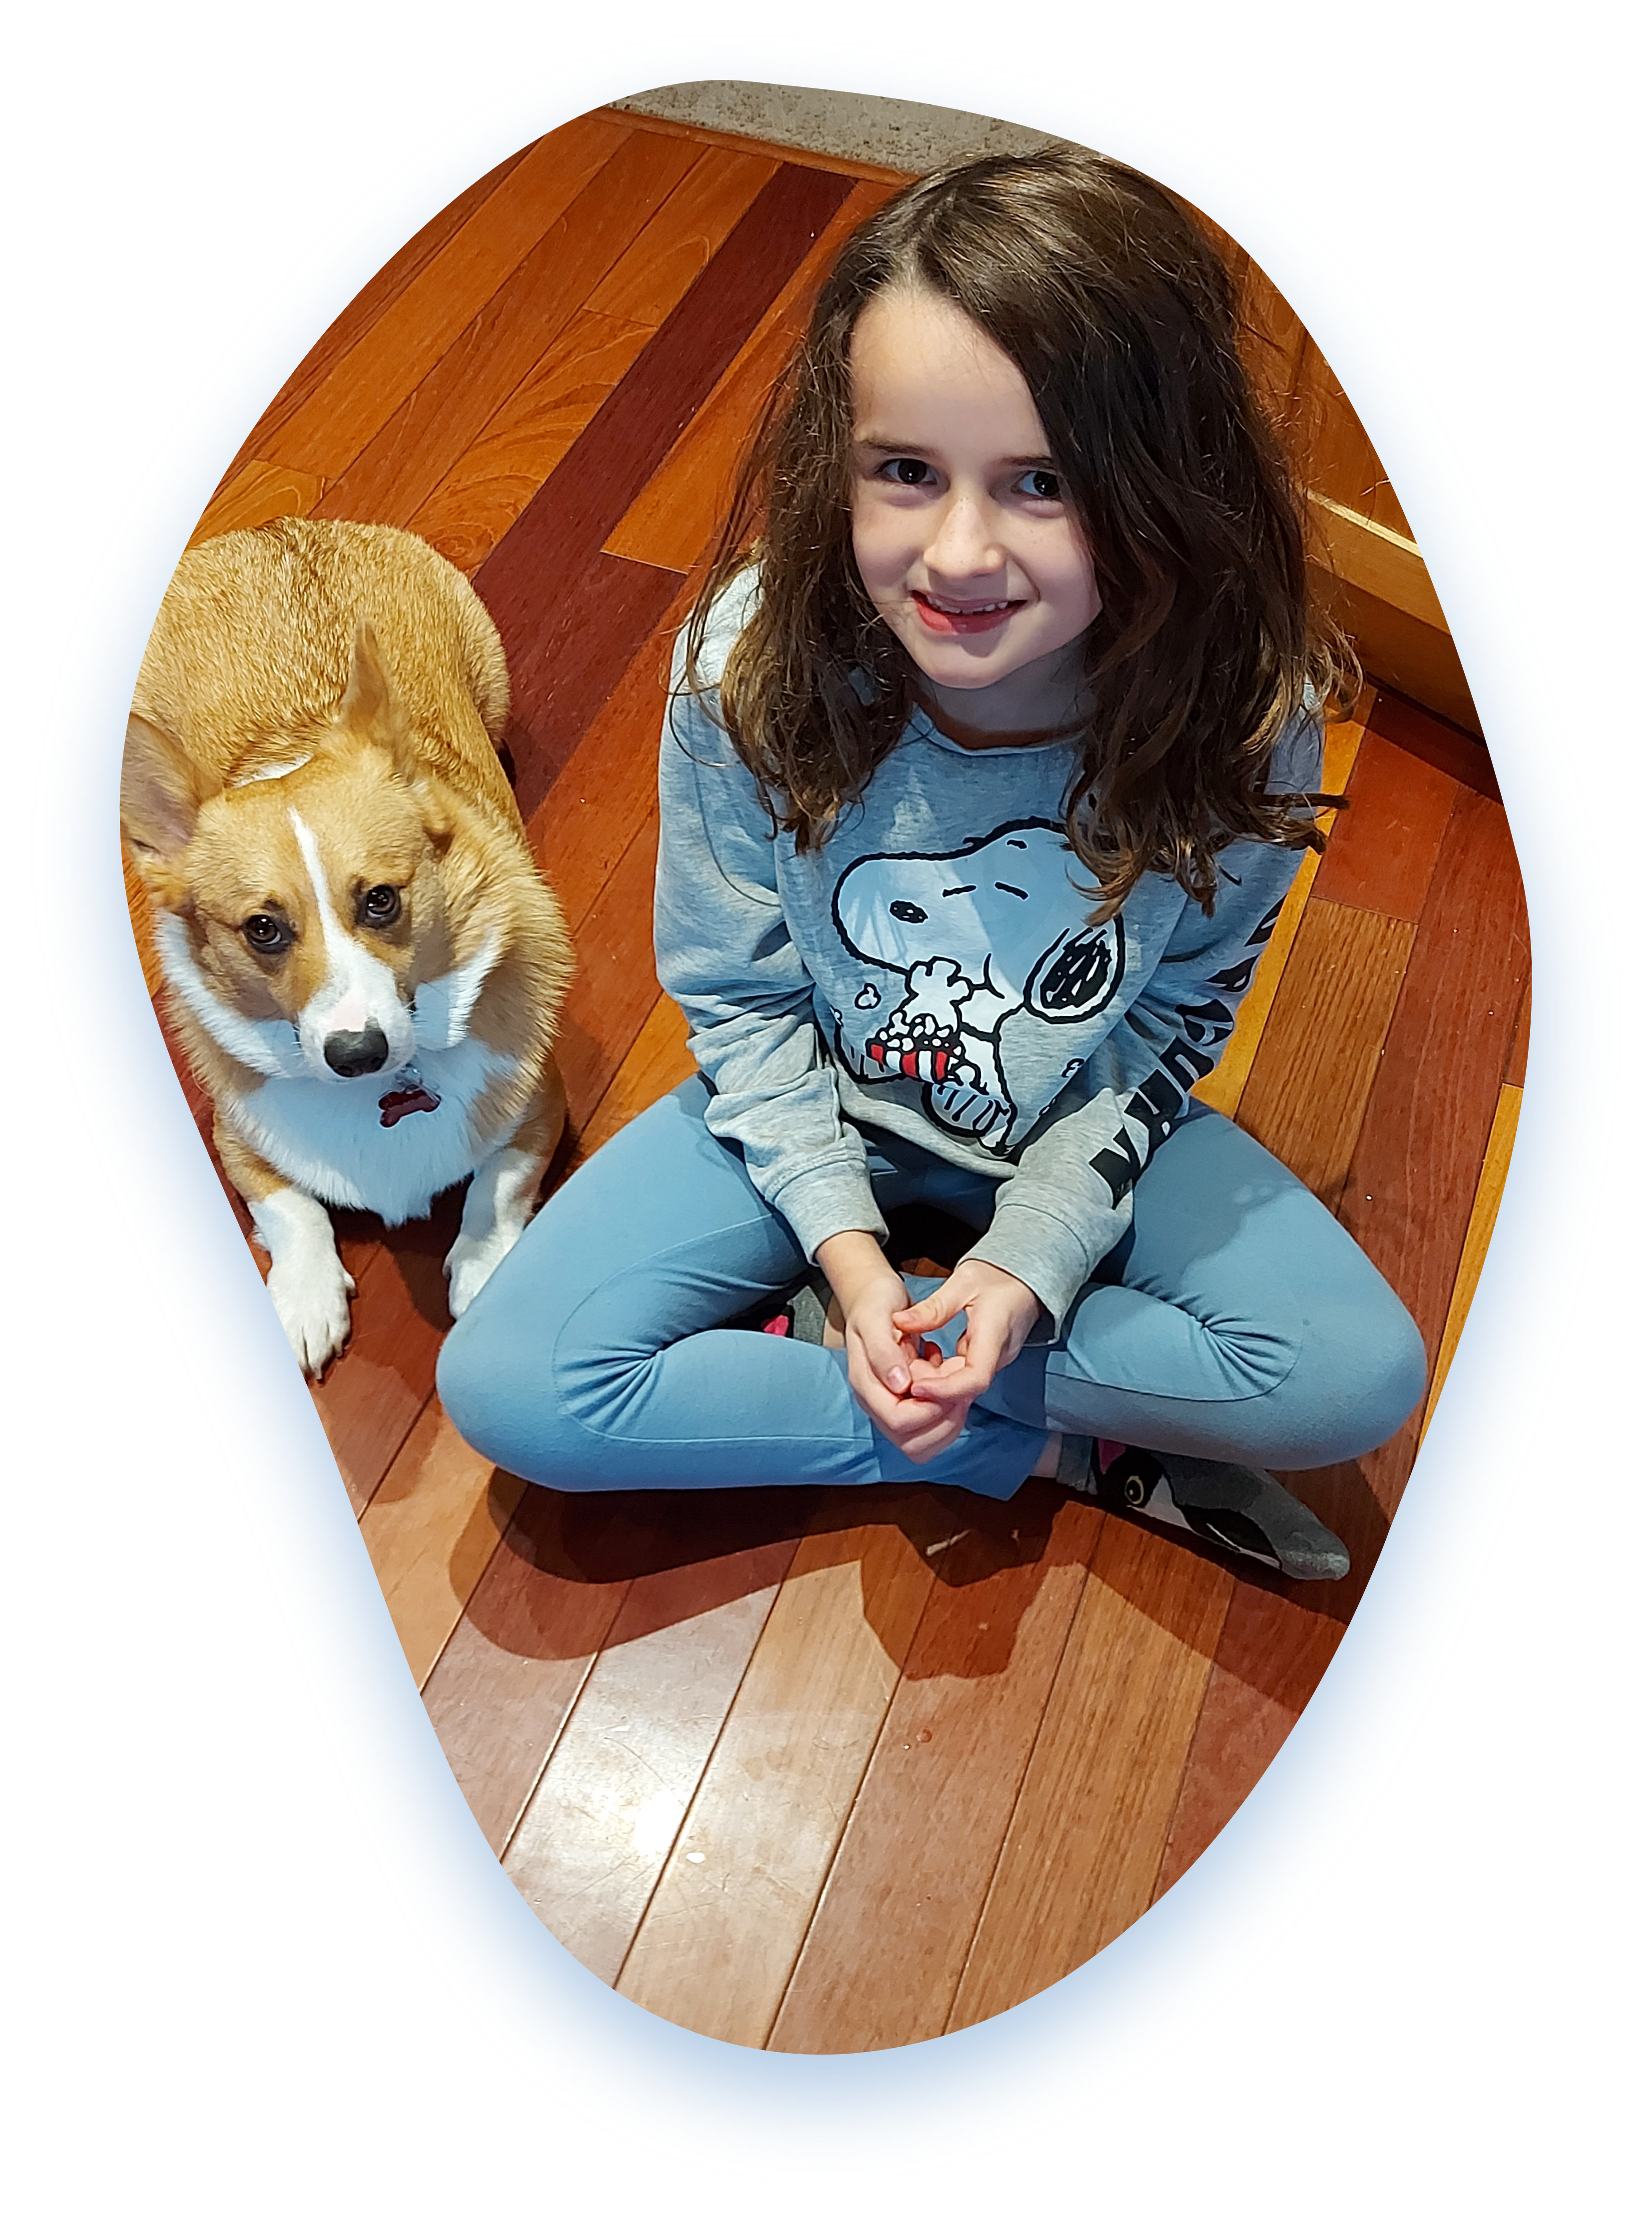 Grandview Kid, Zayla, sits cross-legged on the floor with her pet dog.